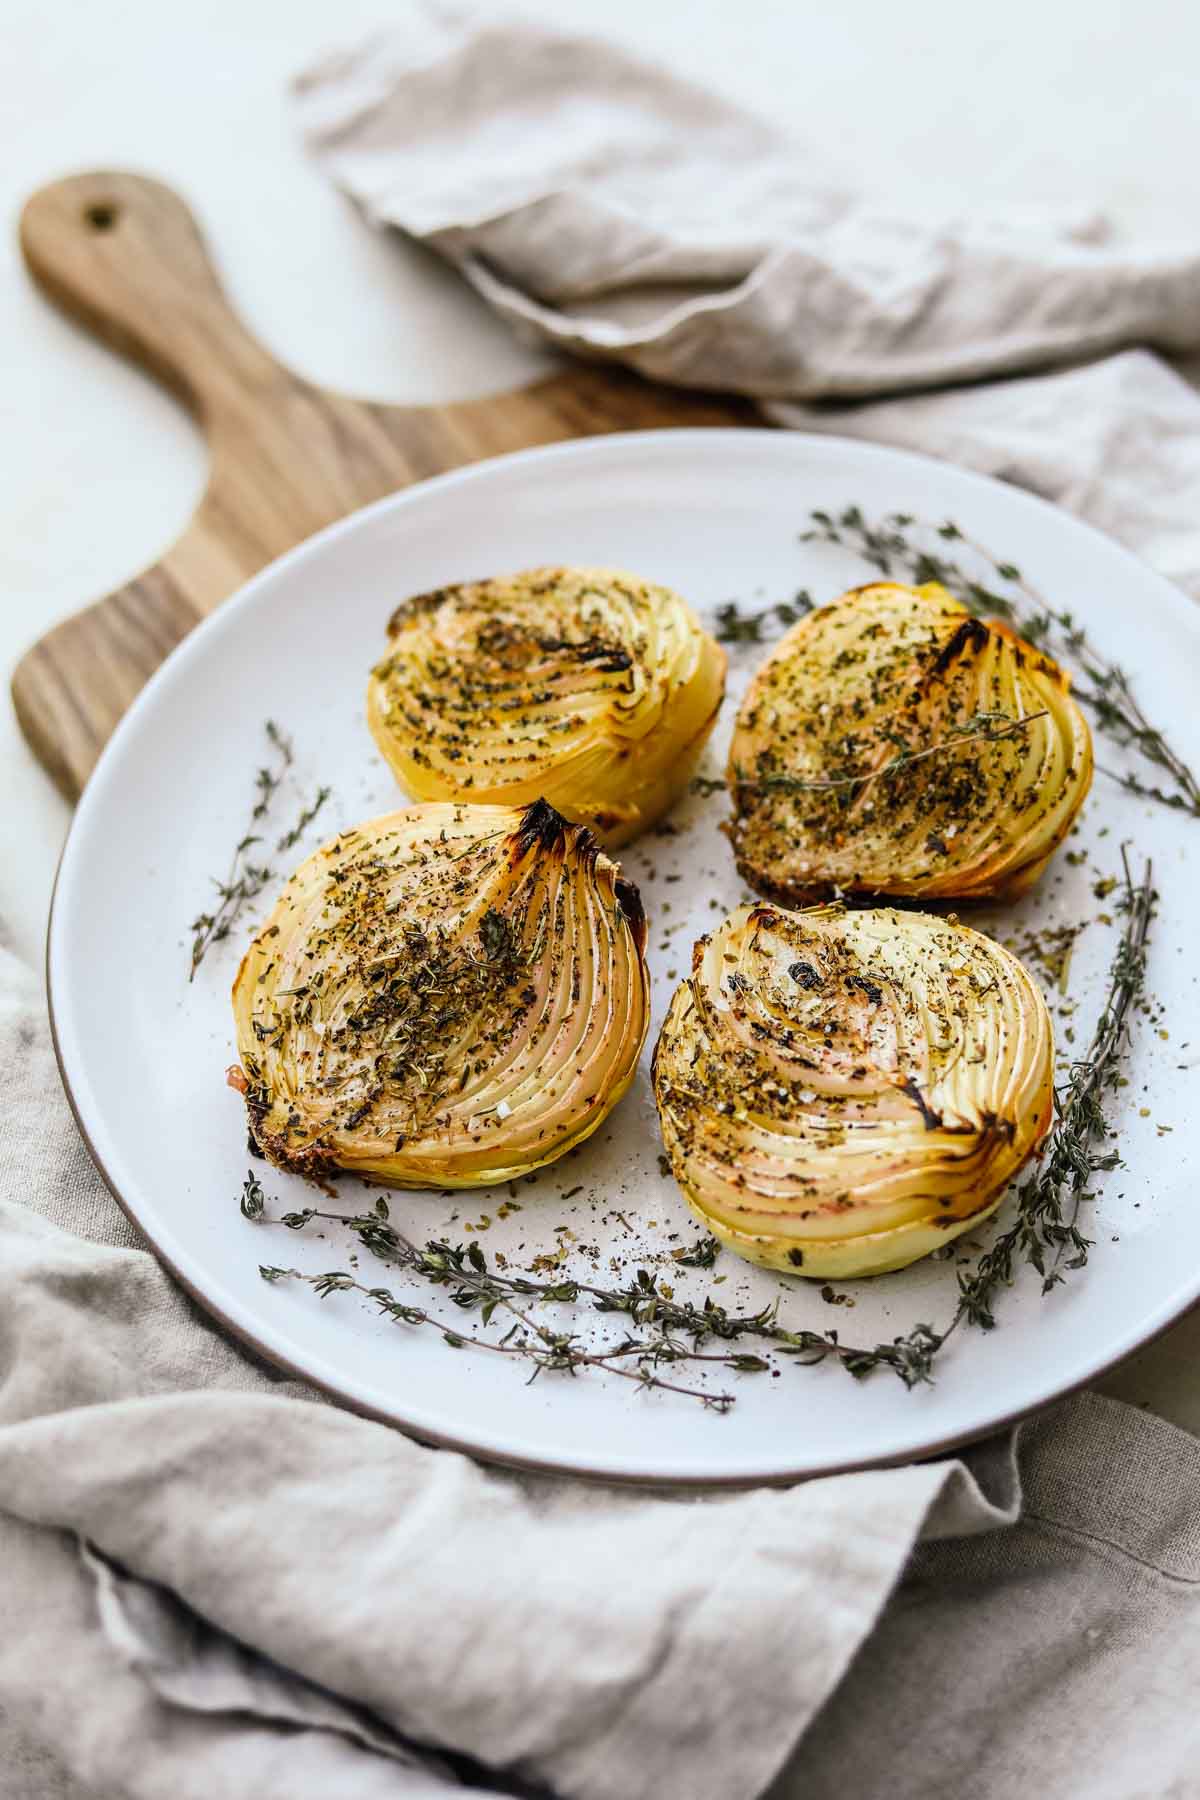 Oven roasted herb onions served on a platter with dried herbs and flaky sea salt.